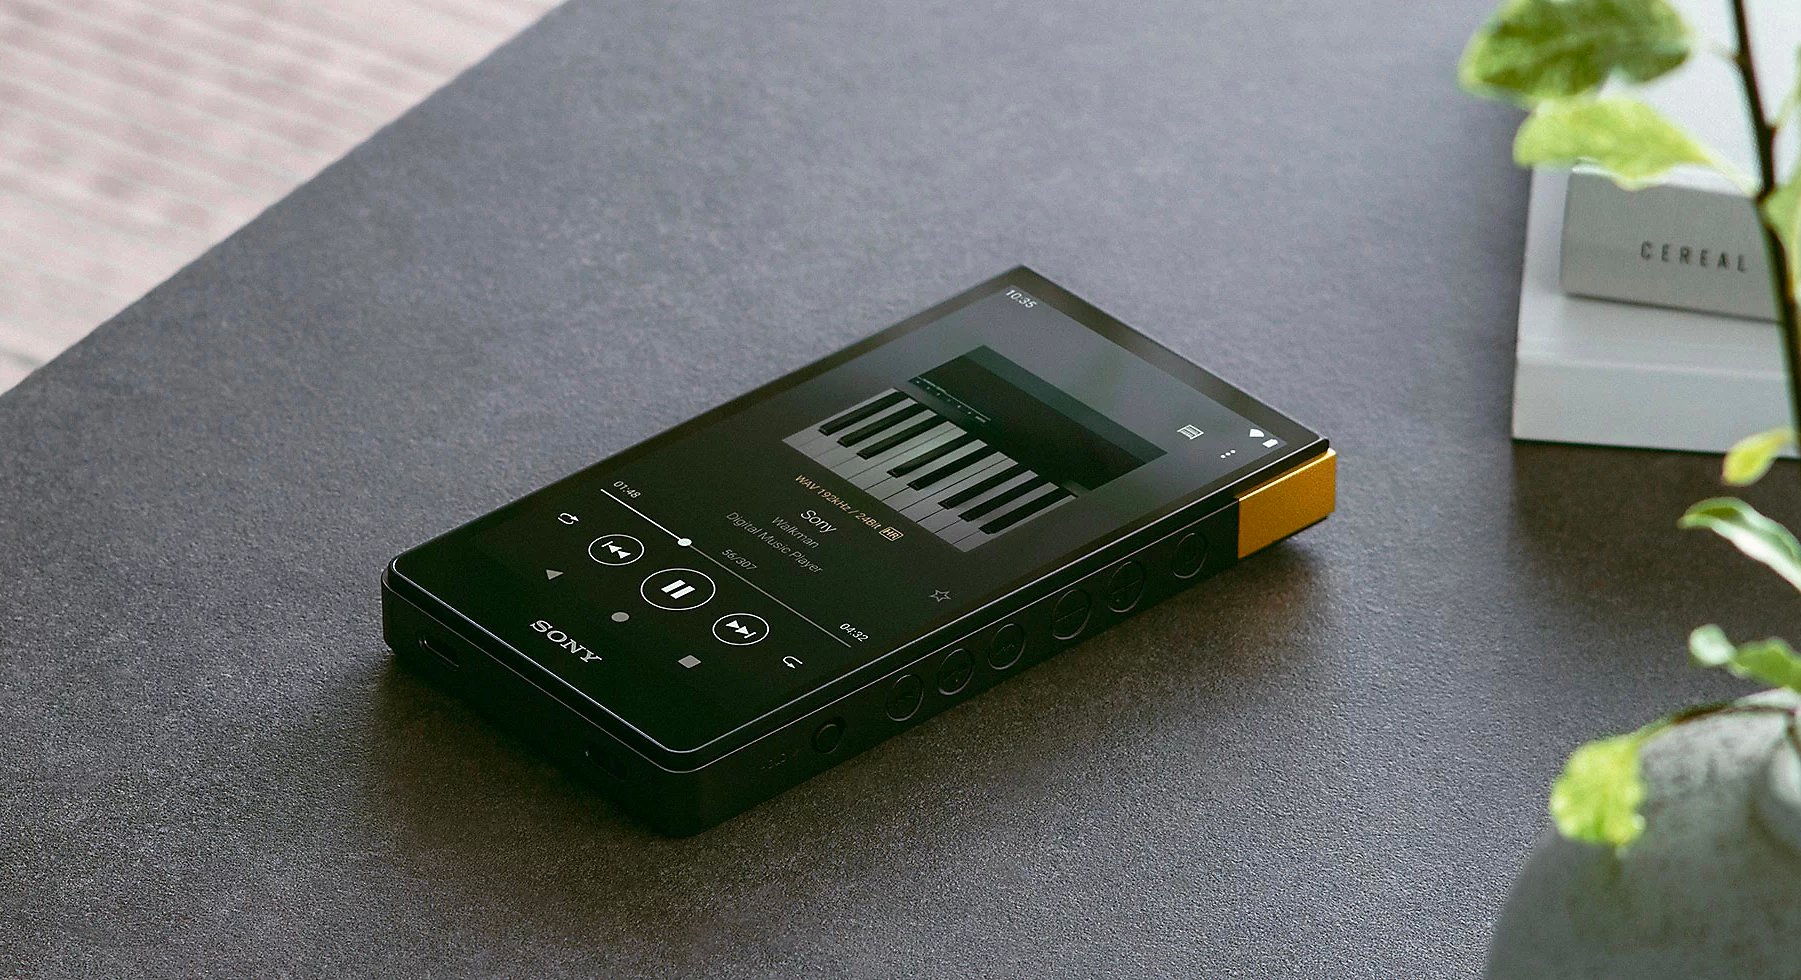 Sony NW-A306 and NW-ZX707 Walkman Portable Audio Players Showcased 